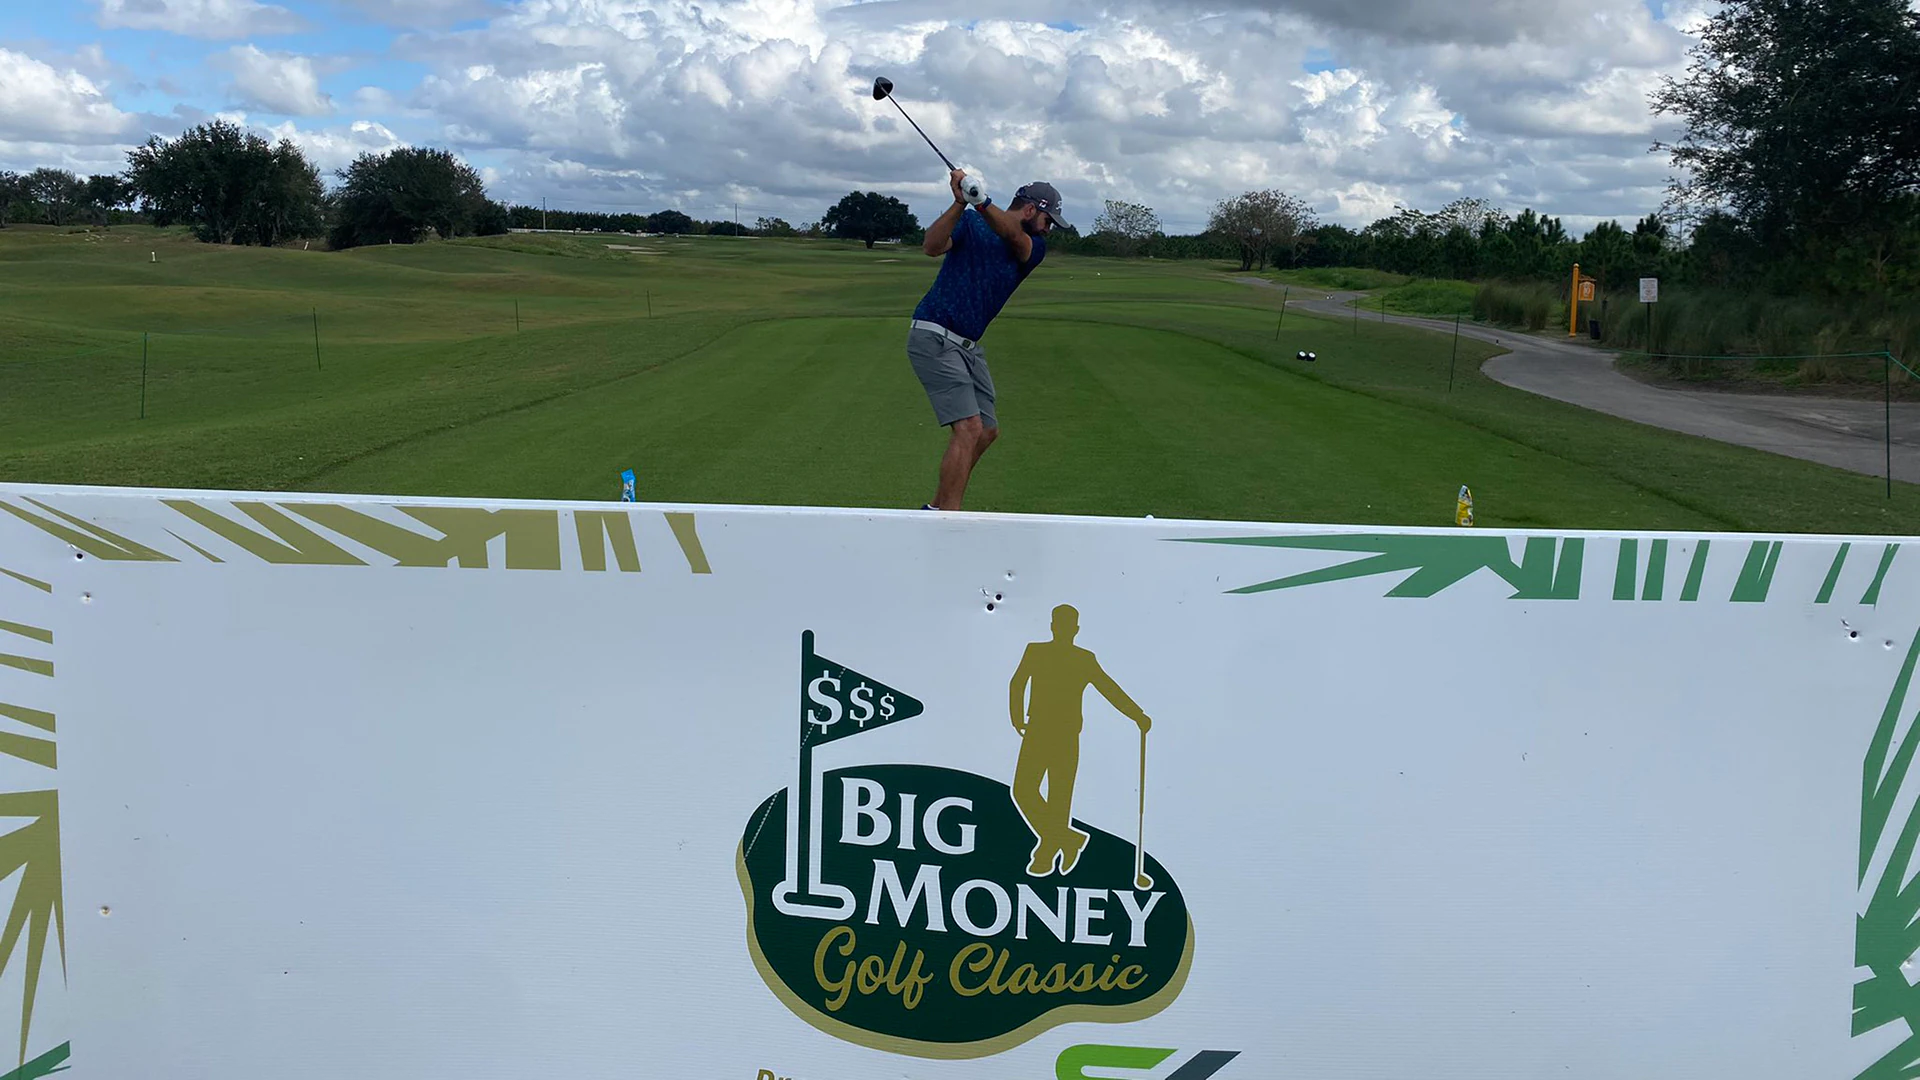 Players owed thousands from Florida mini-tour event Big Money Classic